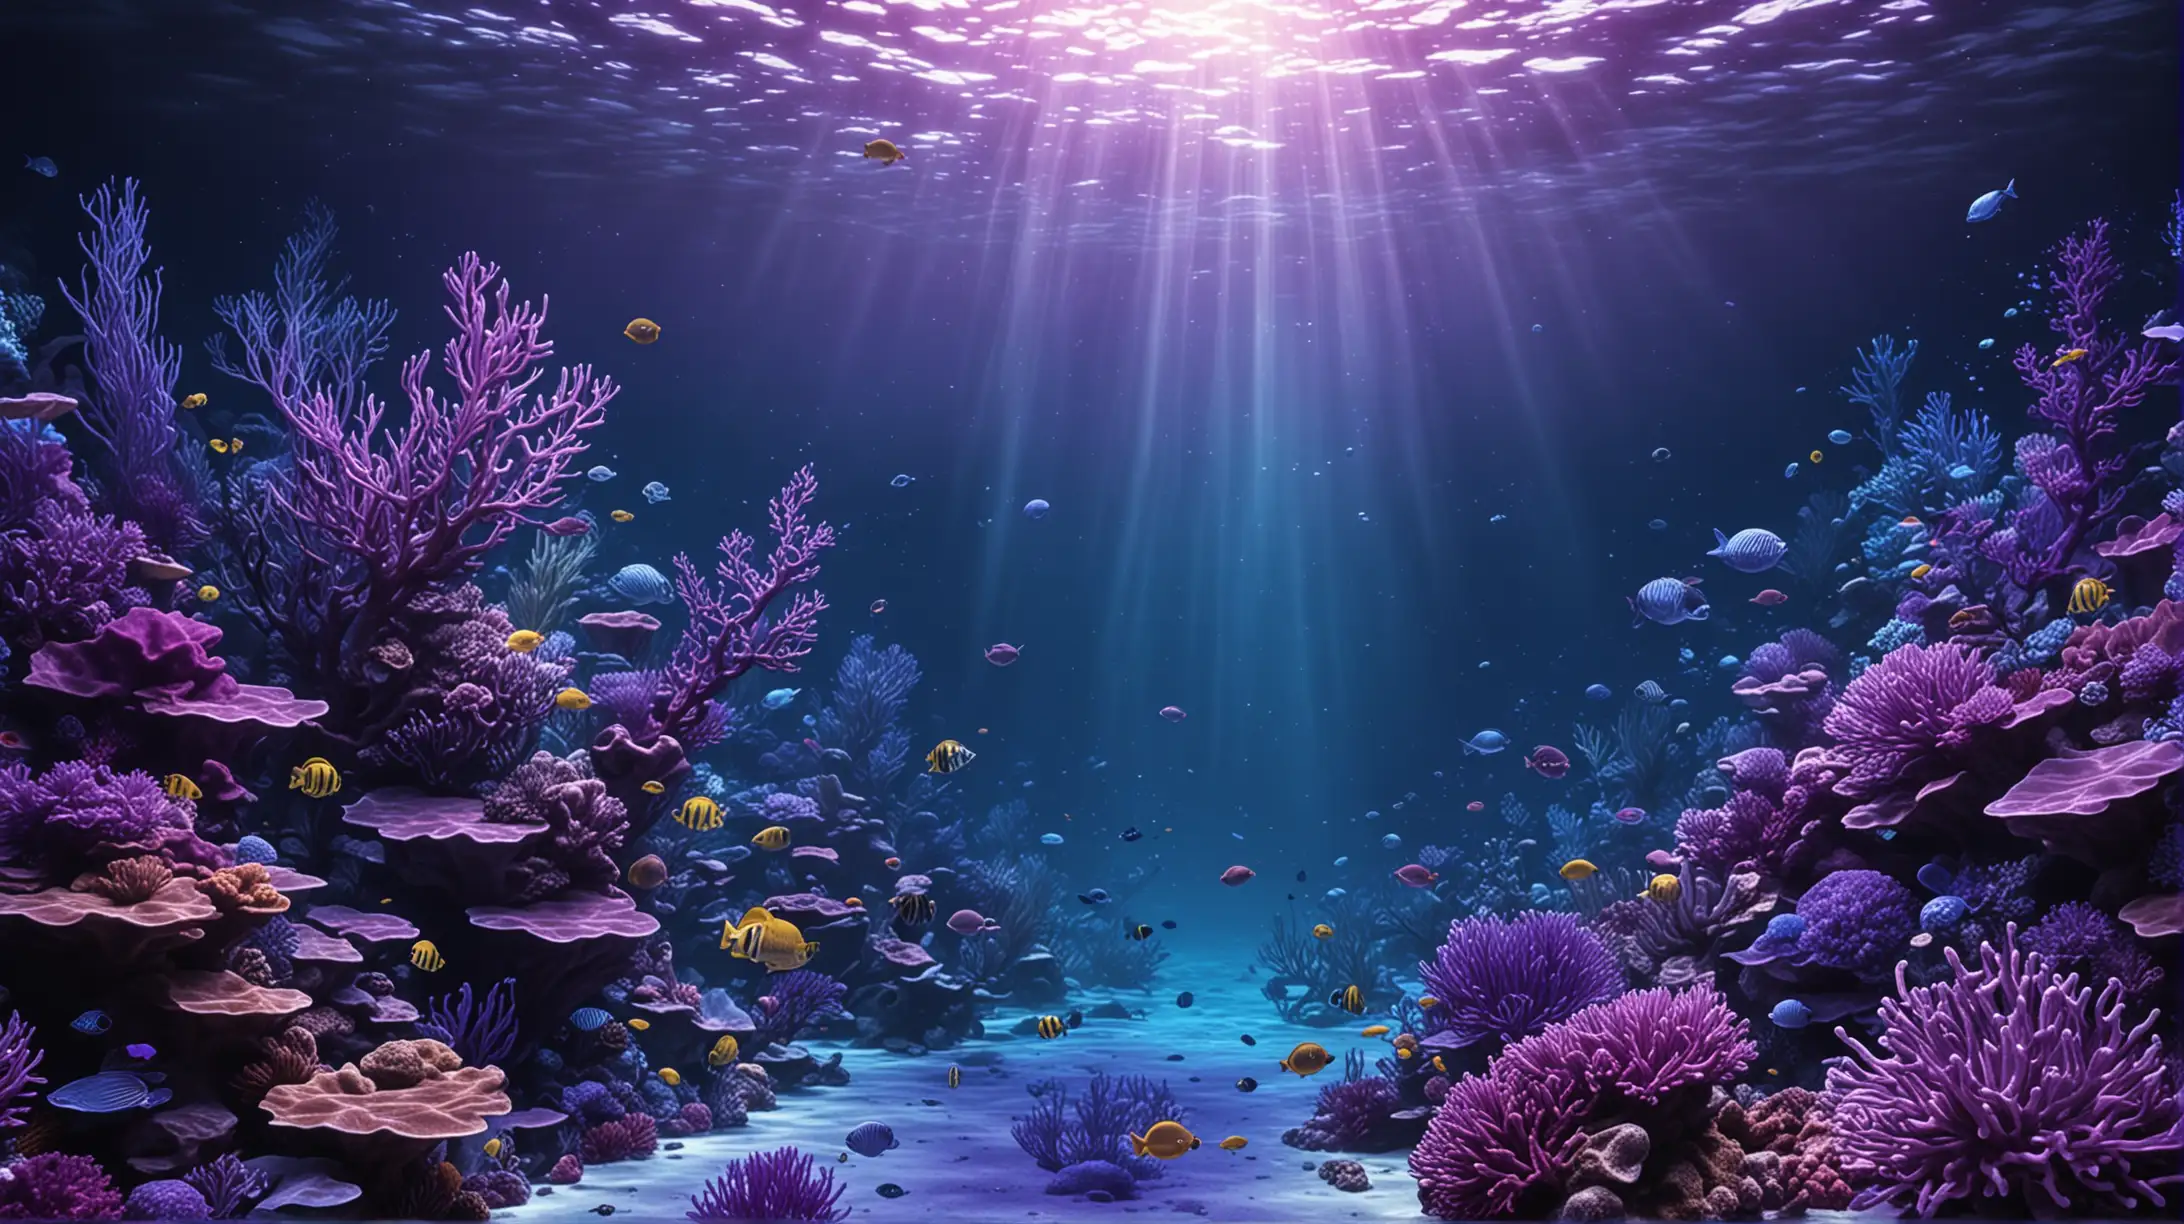 Realistic Underwater World Background in Purple and Blue